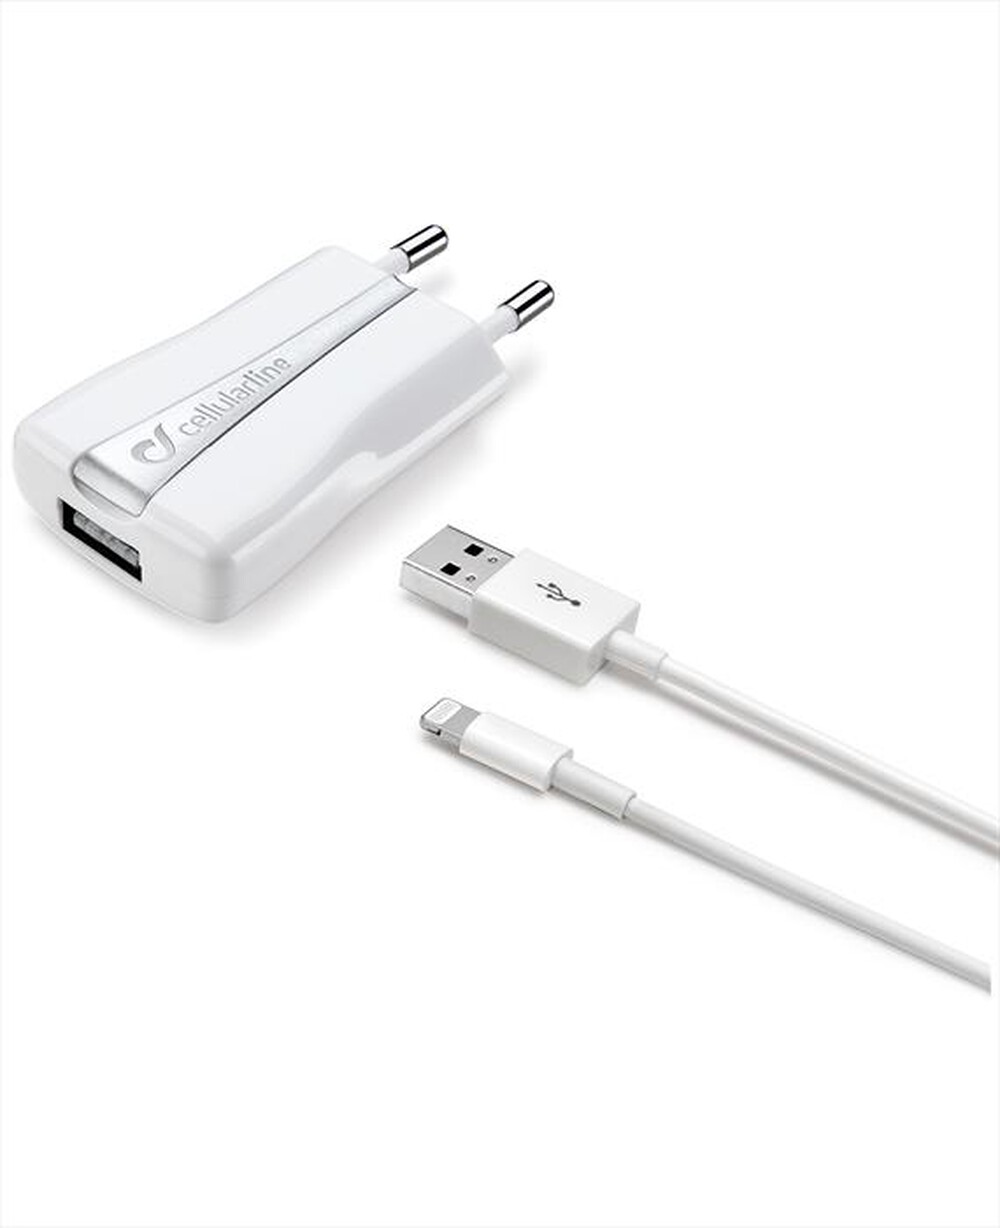 "CELLULARLINE - TRAVEL CHARGER KIT for iPhone 5S/5C/ ACHUSBMFIIPH-Bianco"